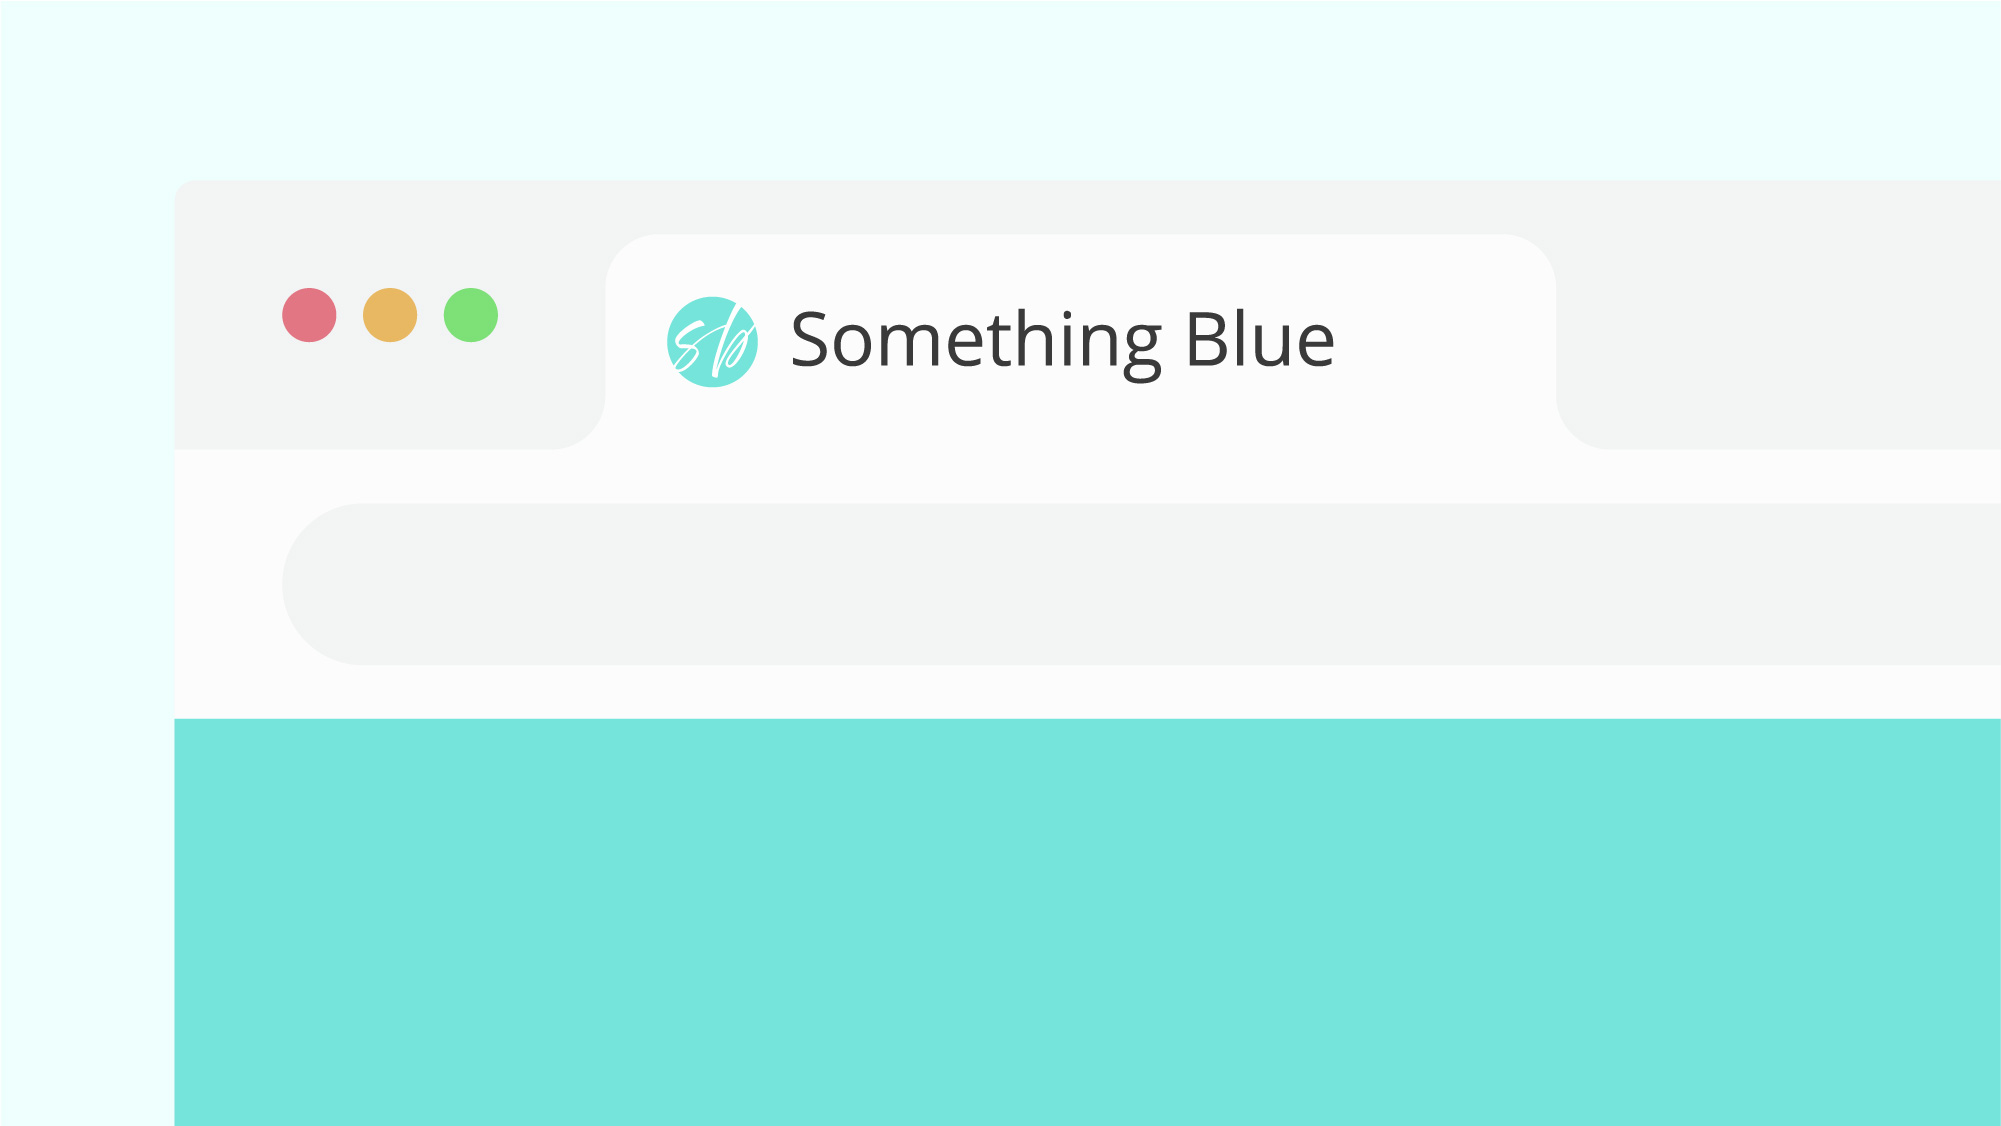 Something-Blue-How-to-get-your-logo-into-the-menu-bar-blog-post-featured-image-Wordpress-Squarespace-Shopify-Showit